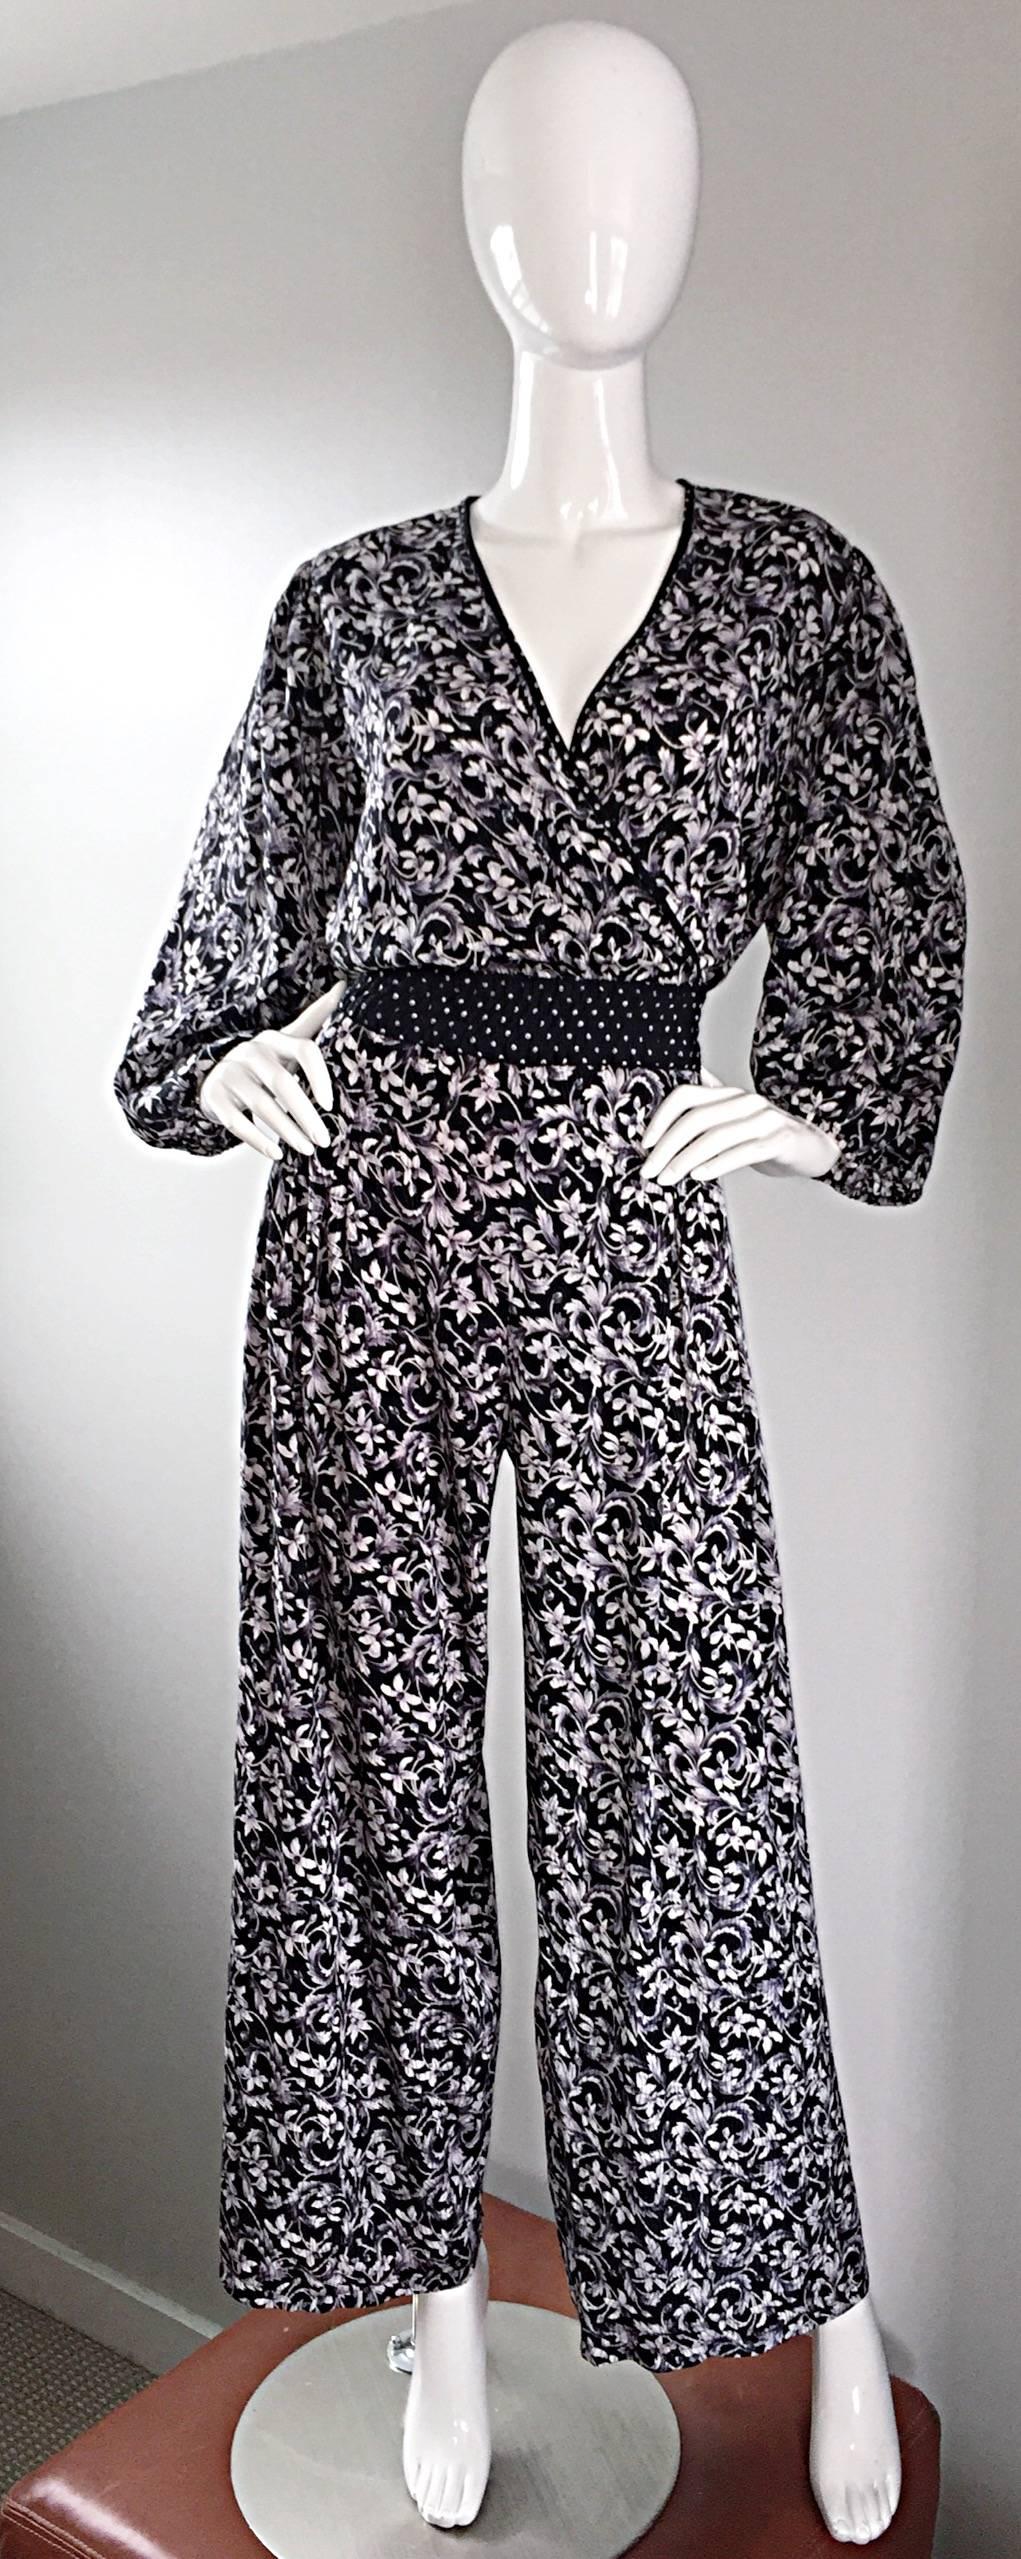 Amazing vintage DIANE FRES / FREIS black and white boho jumpsuit! Signature Fres style, with an elastic waist (meant to fit a wide variety of sizes). Her jumpsuits are very rare to come by, and highly sought after. Wide palazzo legs, and a v-neck